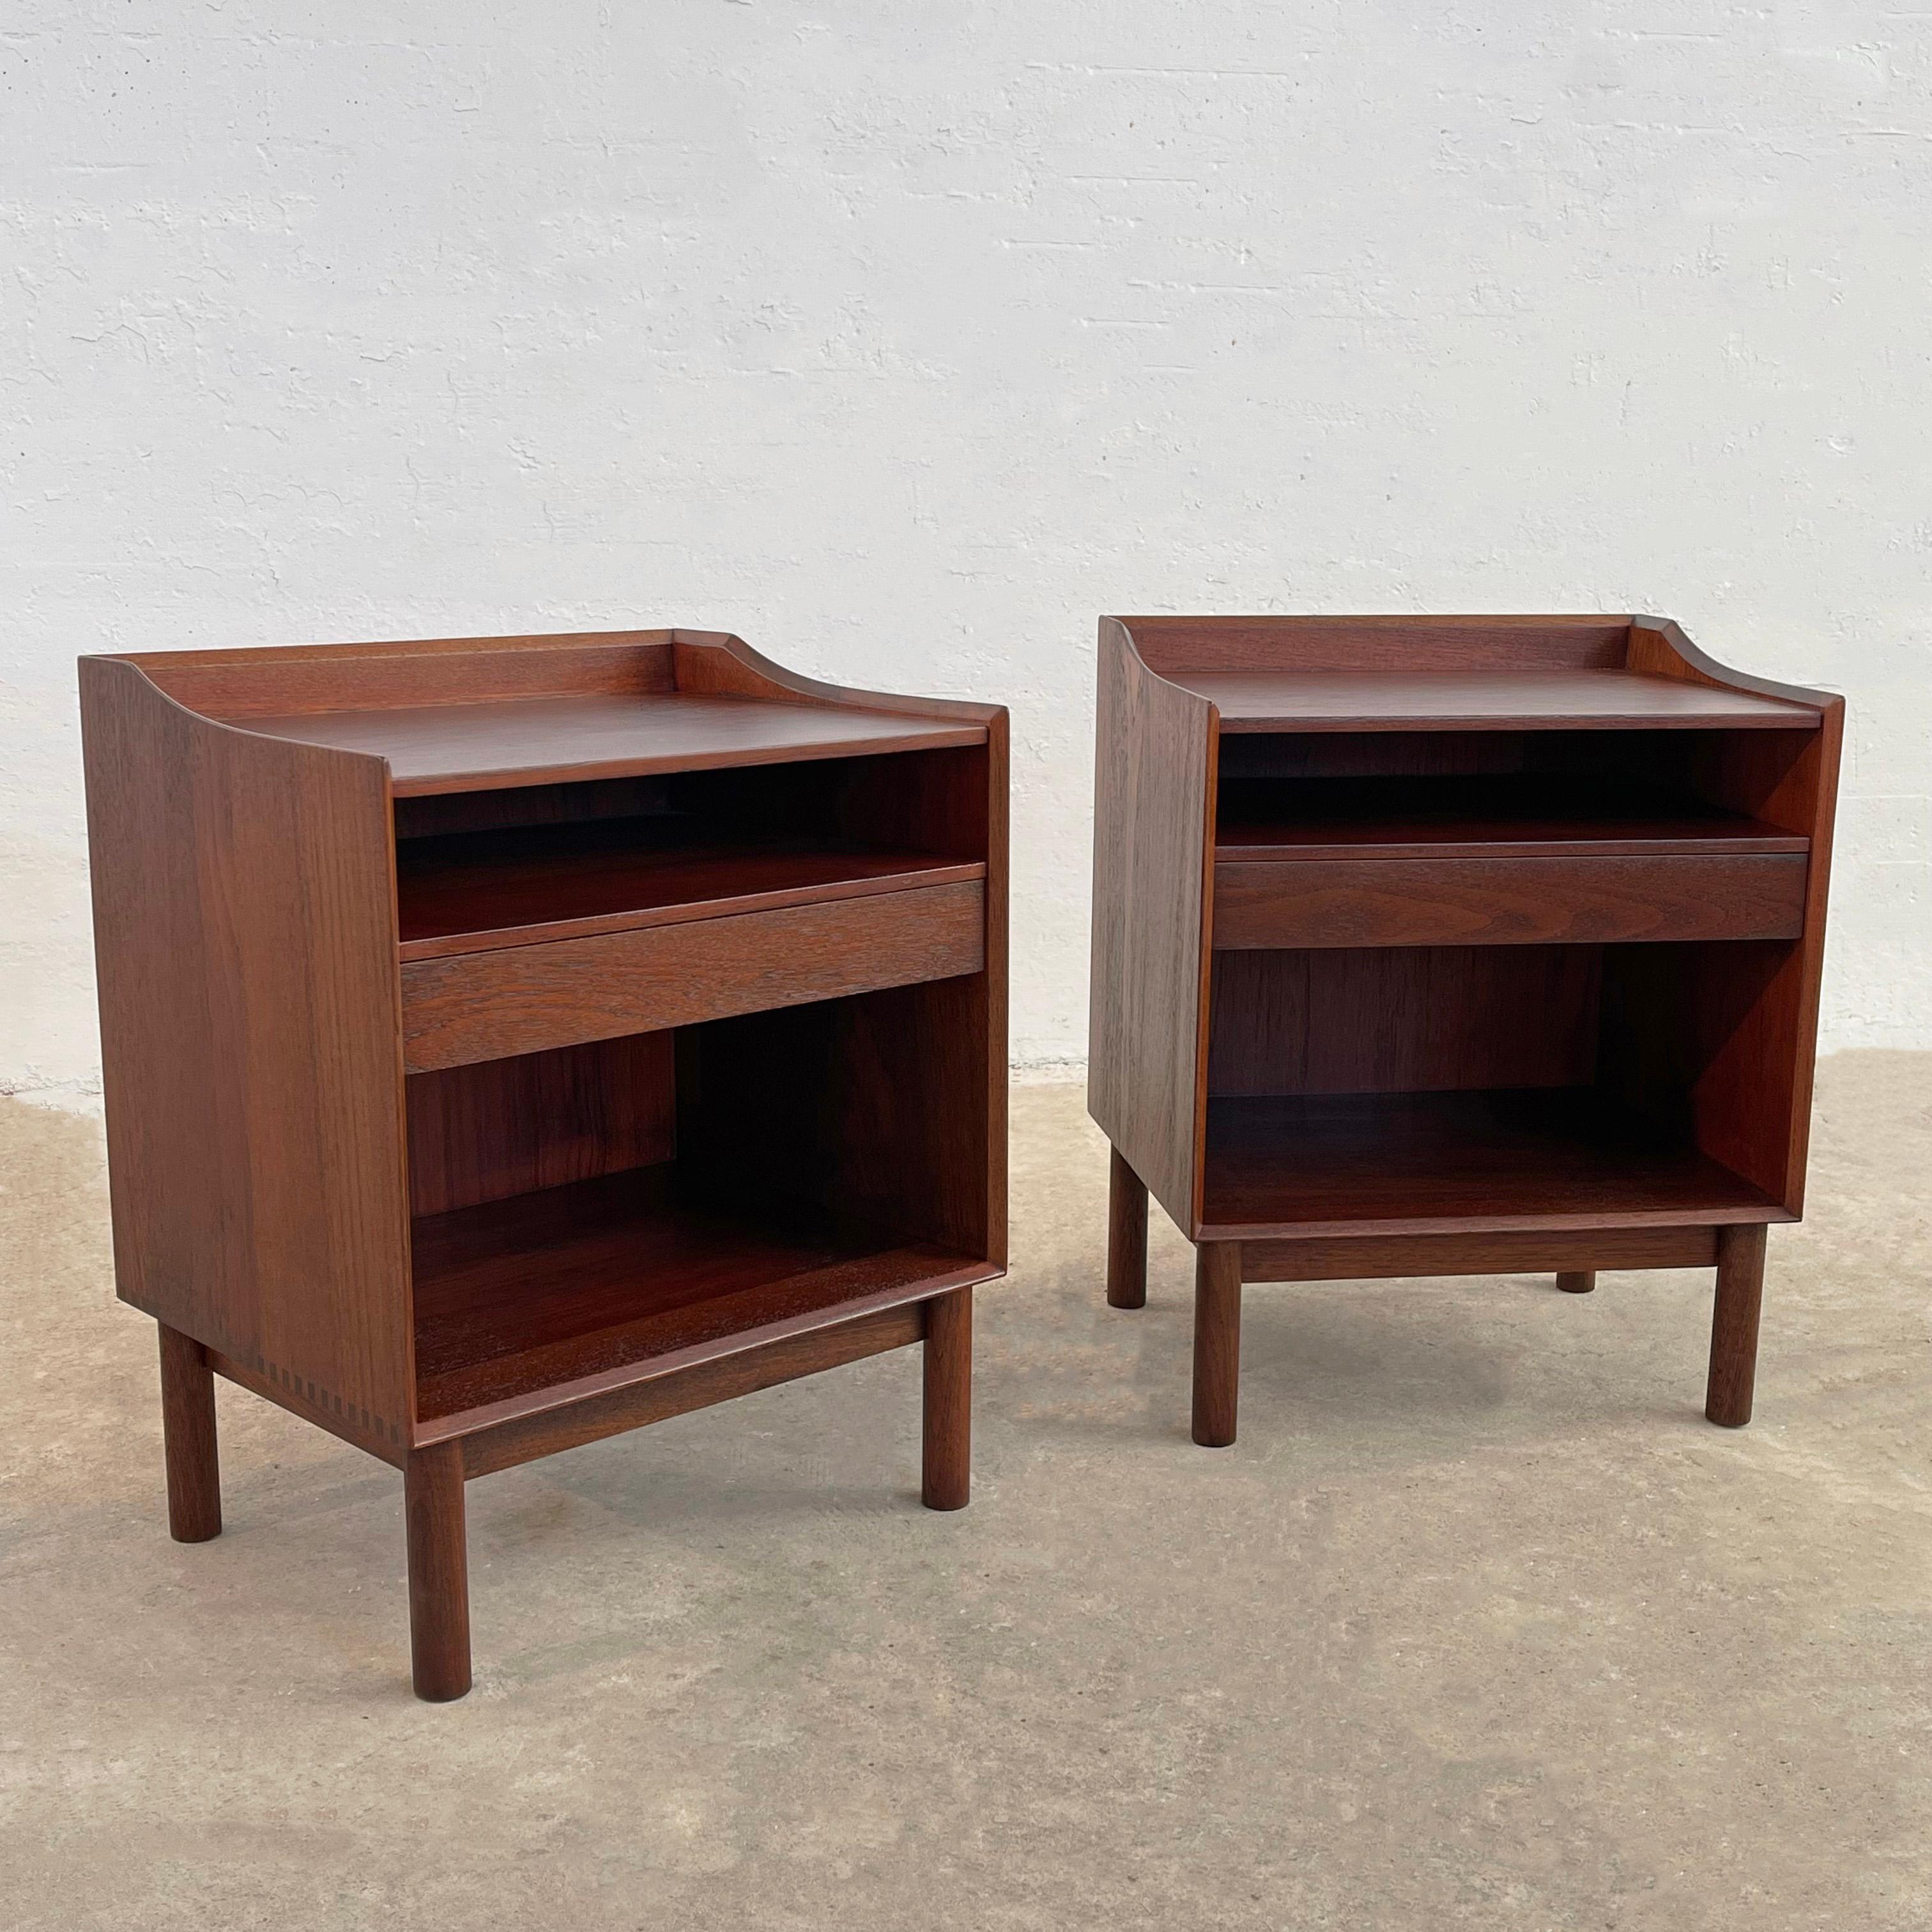 Pair of streamlined, Danish modern, teak nighstands or end tables by Peter Hvidt and Orla Molgaard-Nielsen for Soborg Mobelfabrik retailed through John Stuart in the U.S., feature middle drawers with open storage above and below. Sleek design and